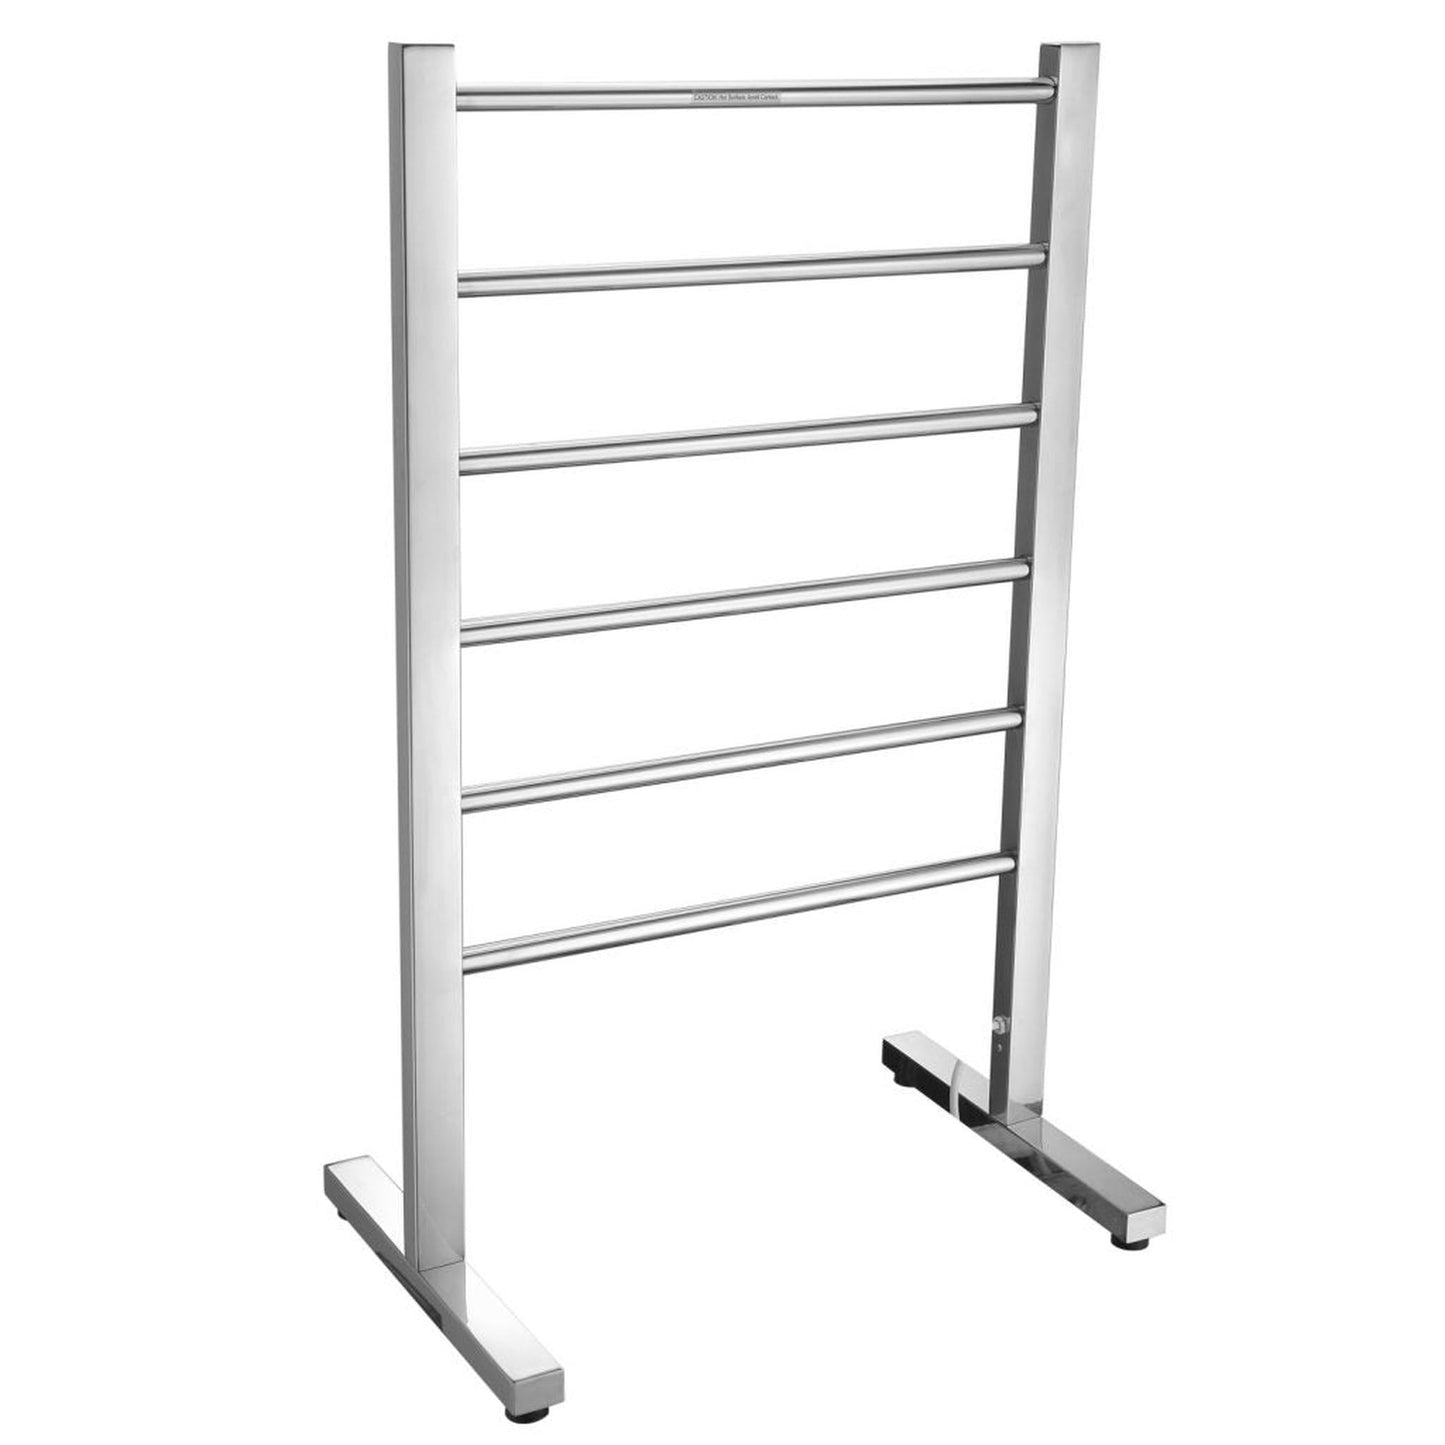 ANZZI Riposte Series Polished Chrome 6-Bar Stainless Steel Floor Mounted Electric Towel Warmer Rack